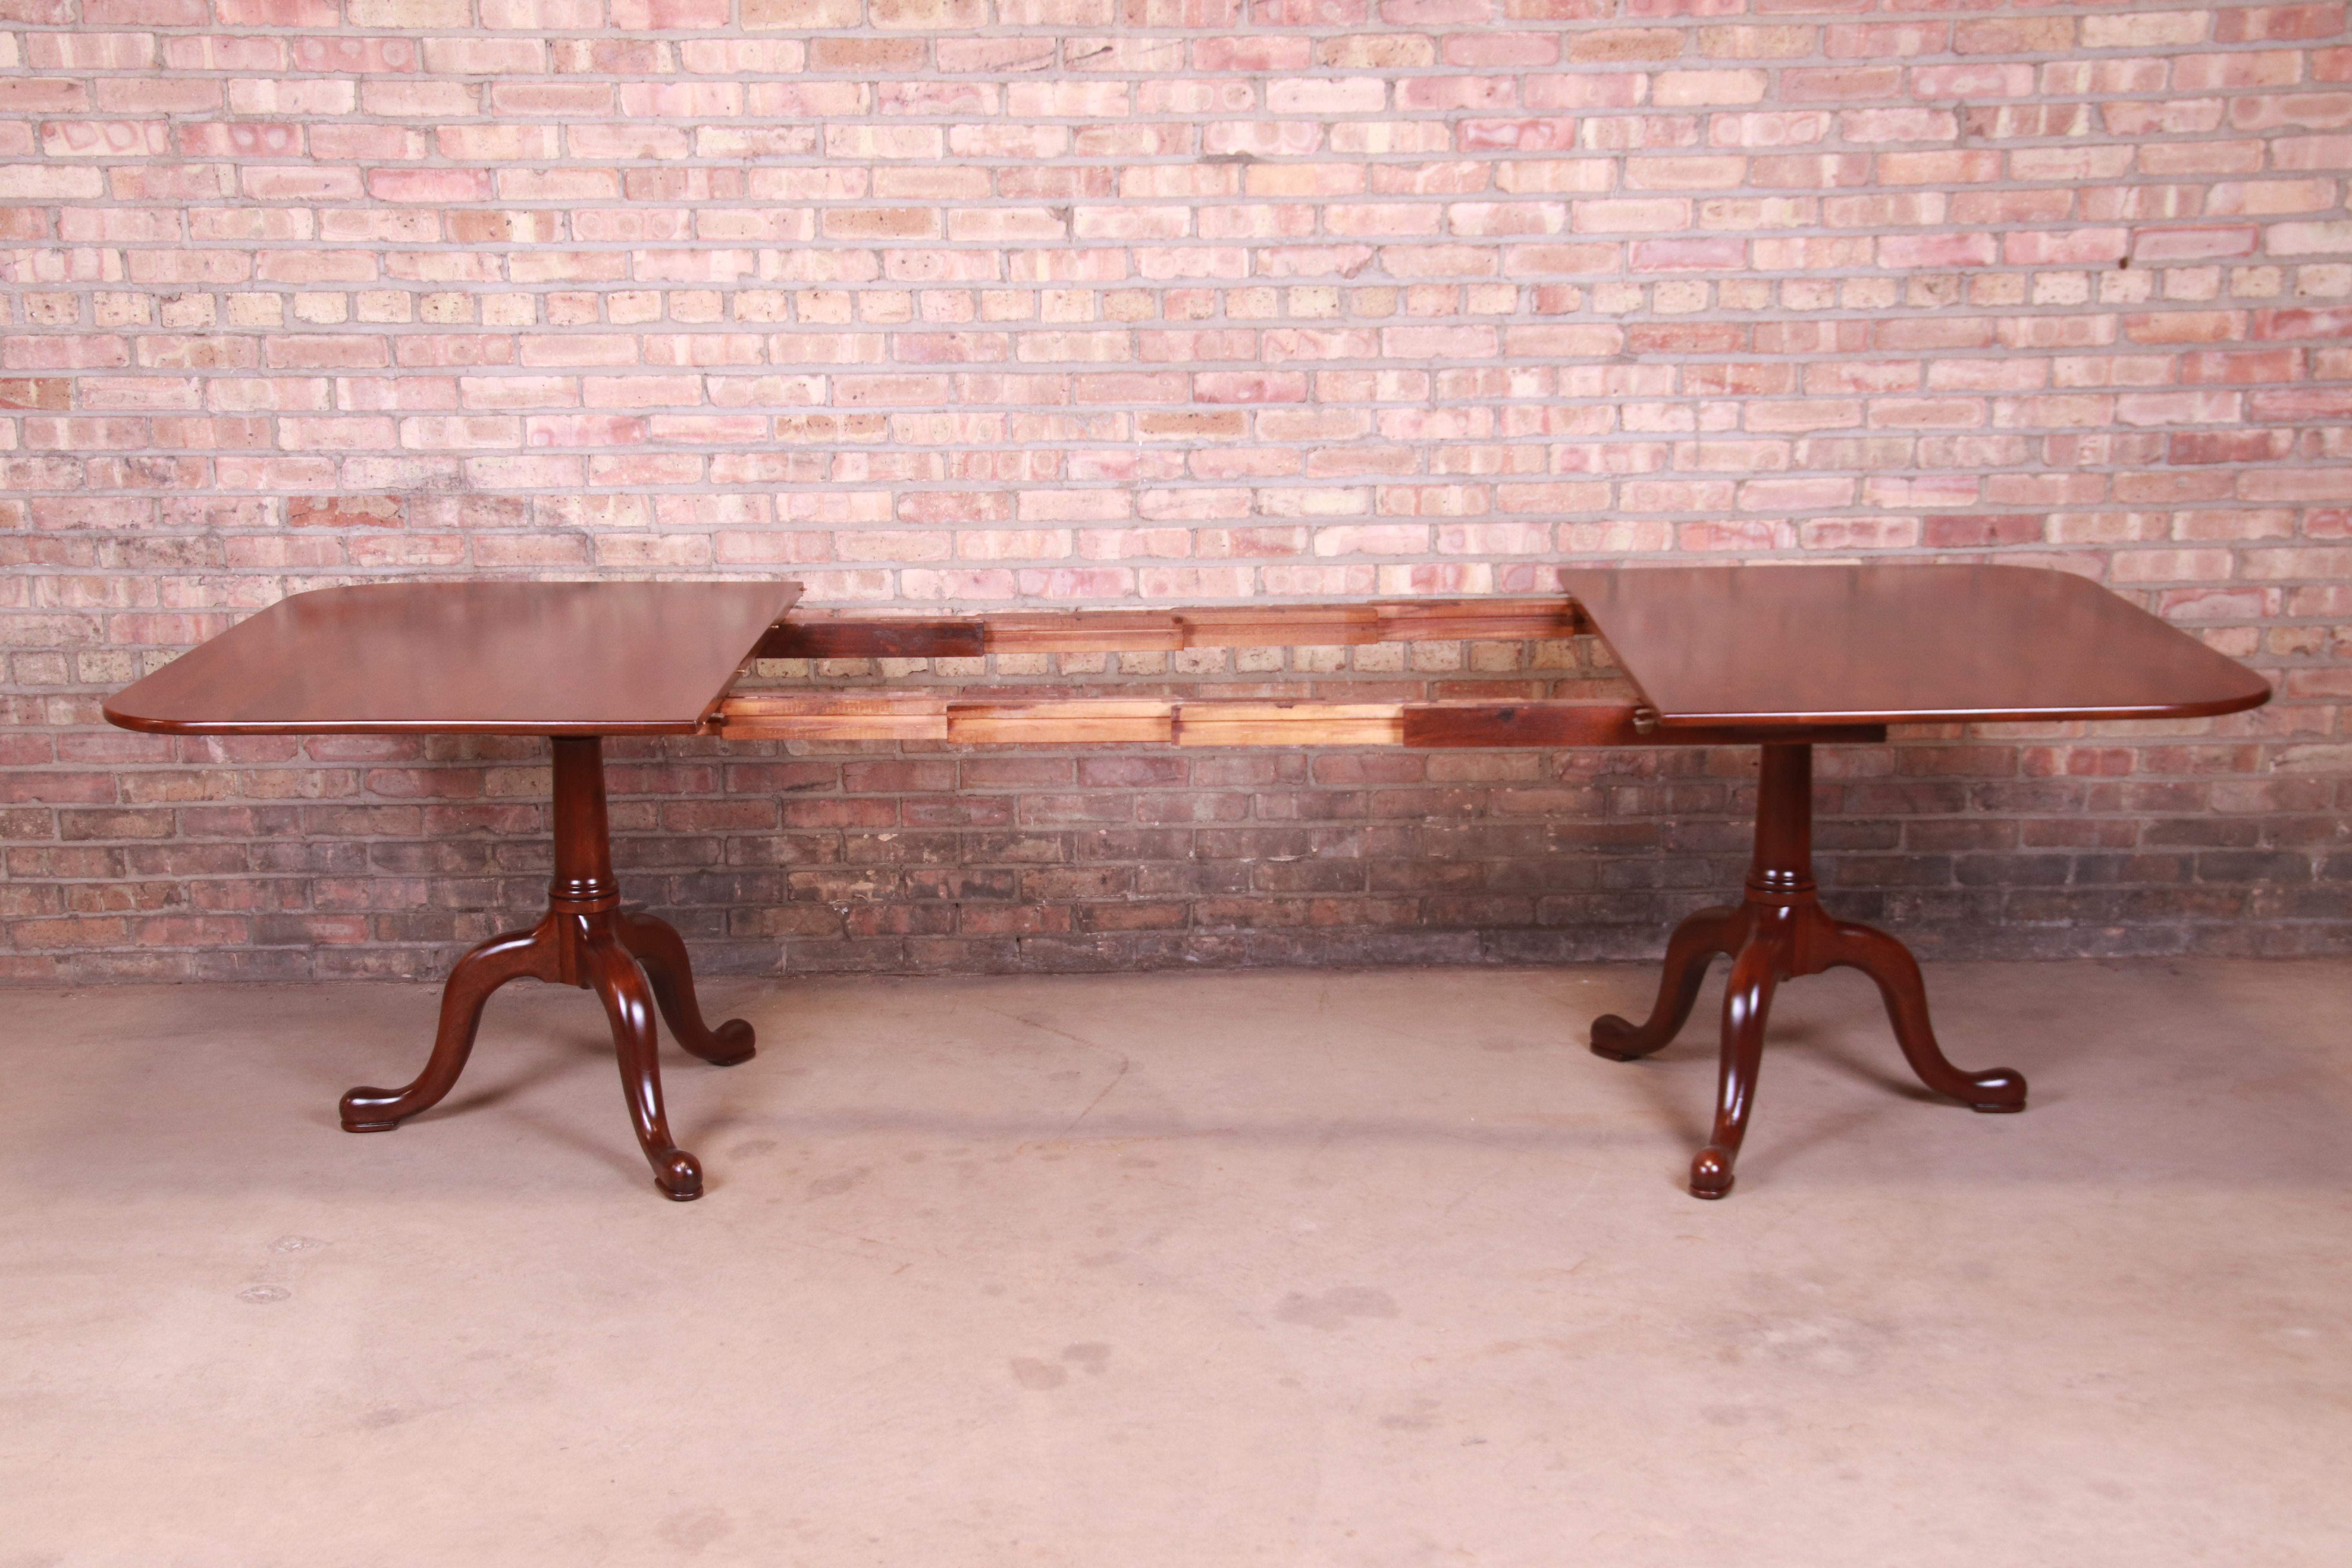 20th Century Henkel Harris Georgian Solid Cherry Double Pedestal Dining Table, Refinished